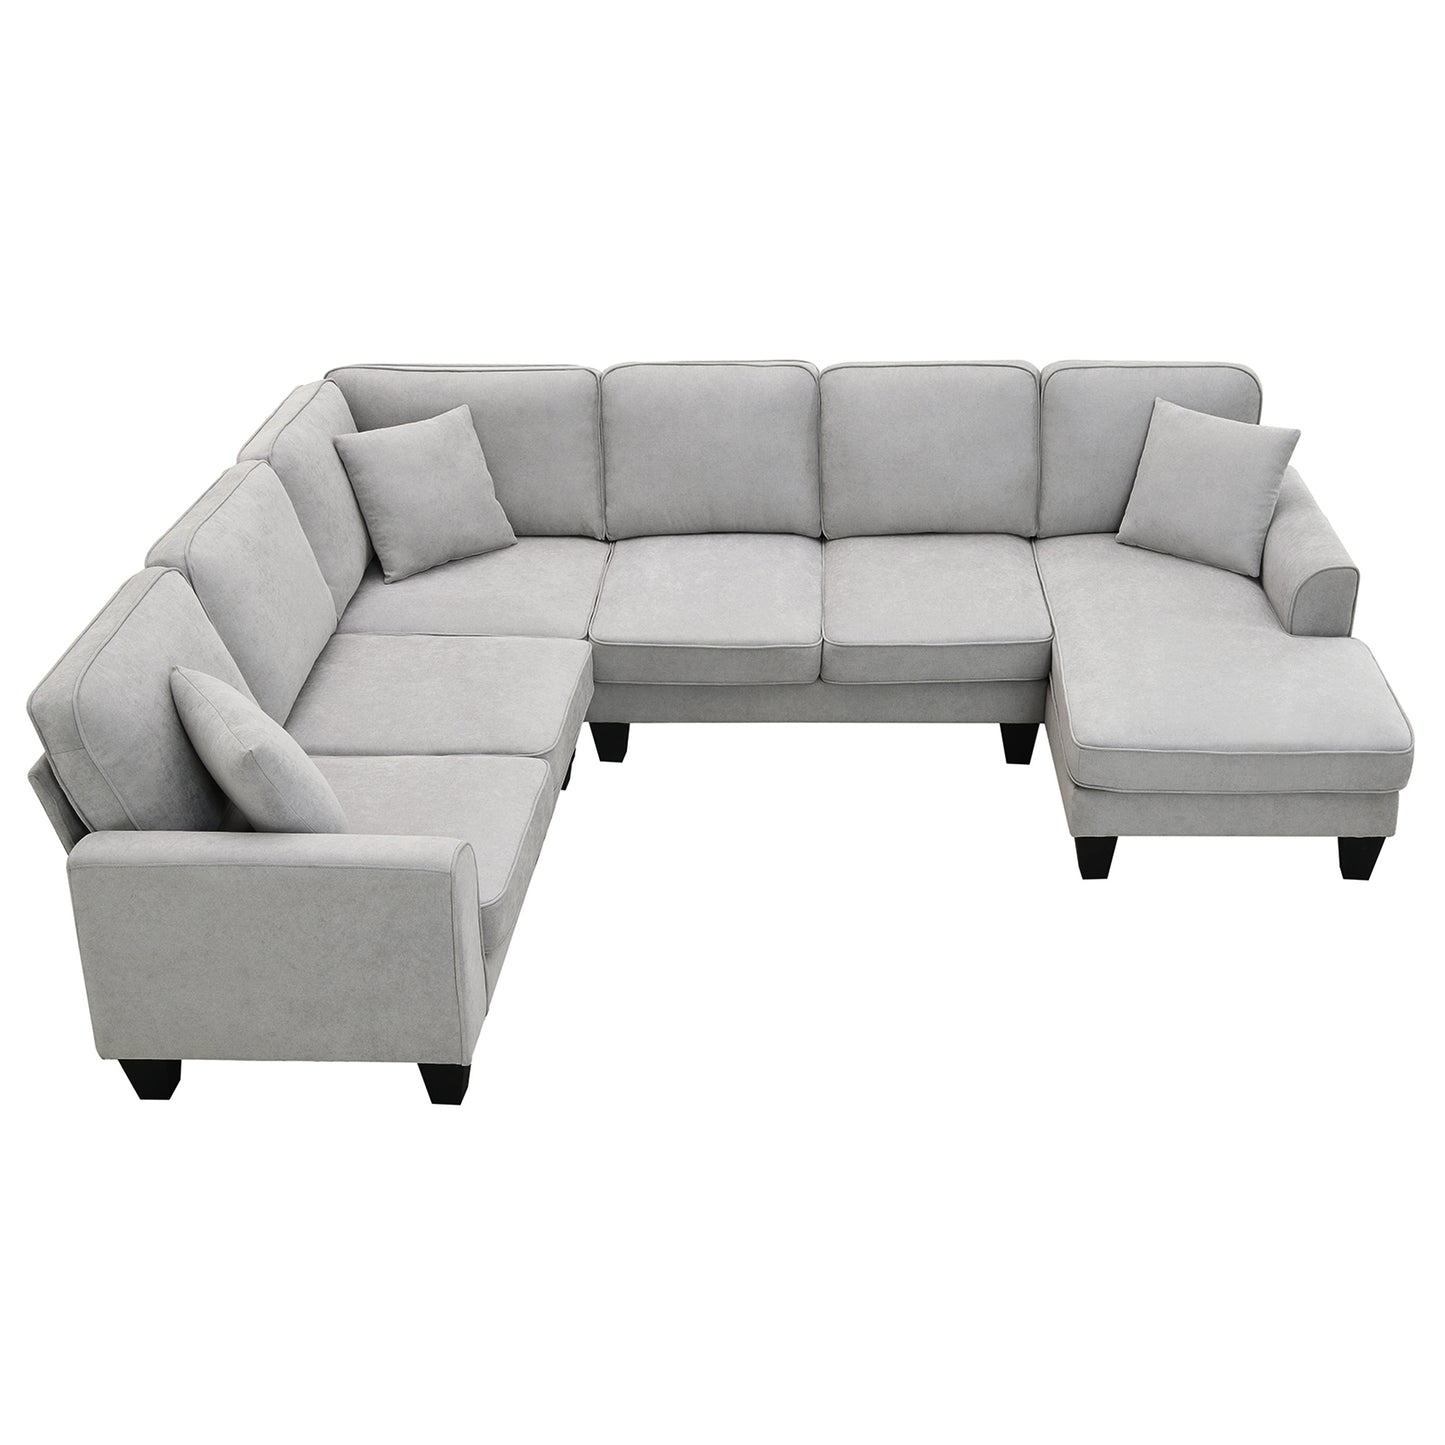 [VIDEO provided] [New] 108*85.5" Modern U Shape Sectional Sofa, 7 Seat Fabric Sectional Sofa Set with 3 Pillows Included for Living Room, Apartment, Office,3 Colors